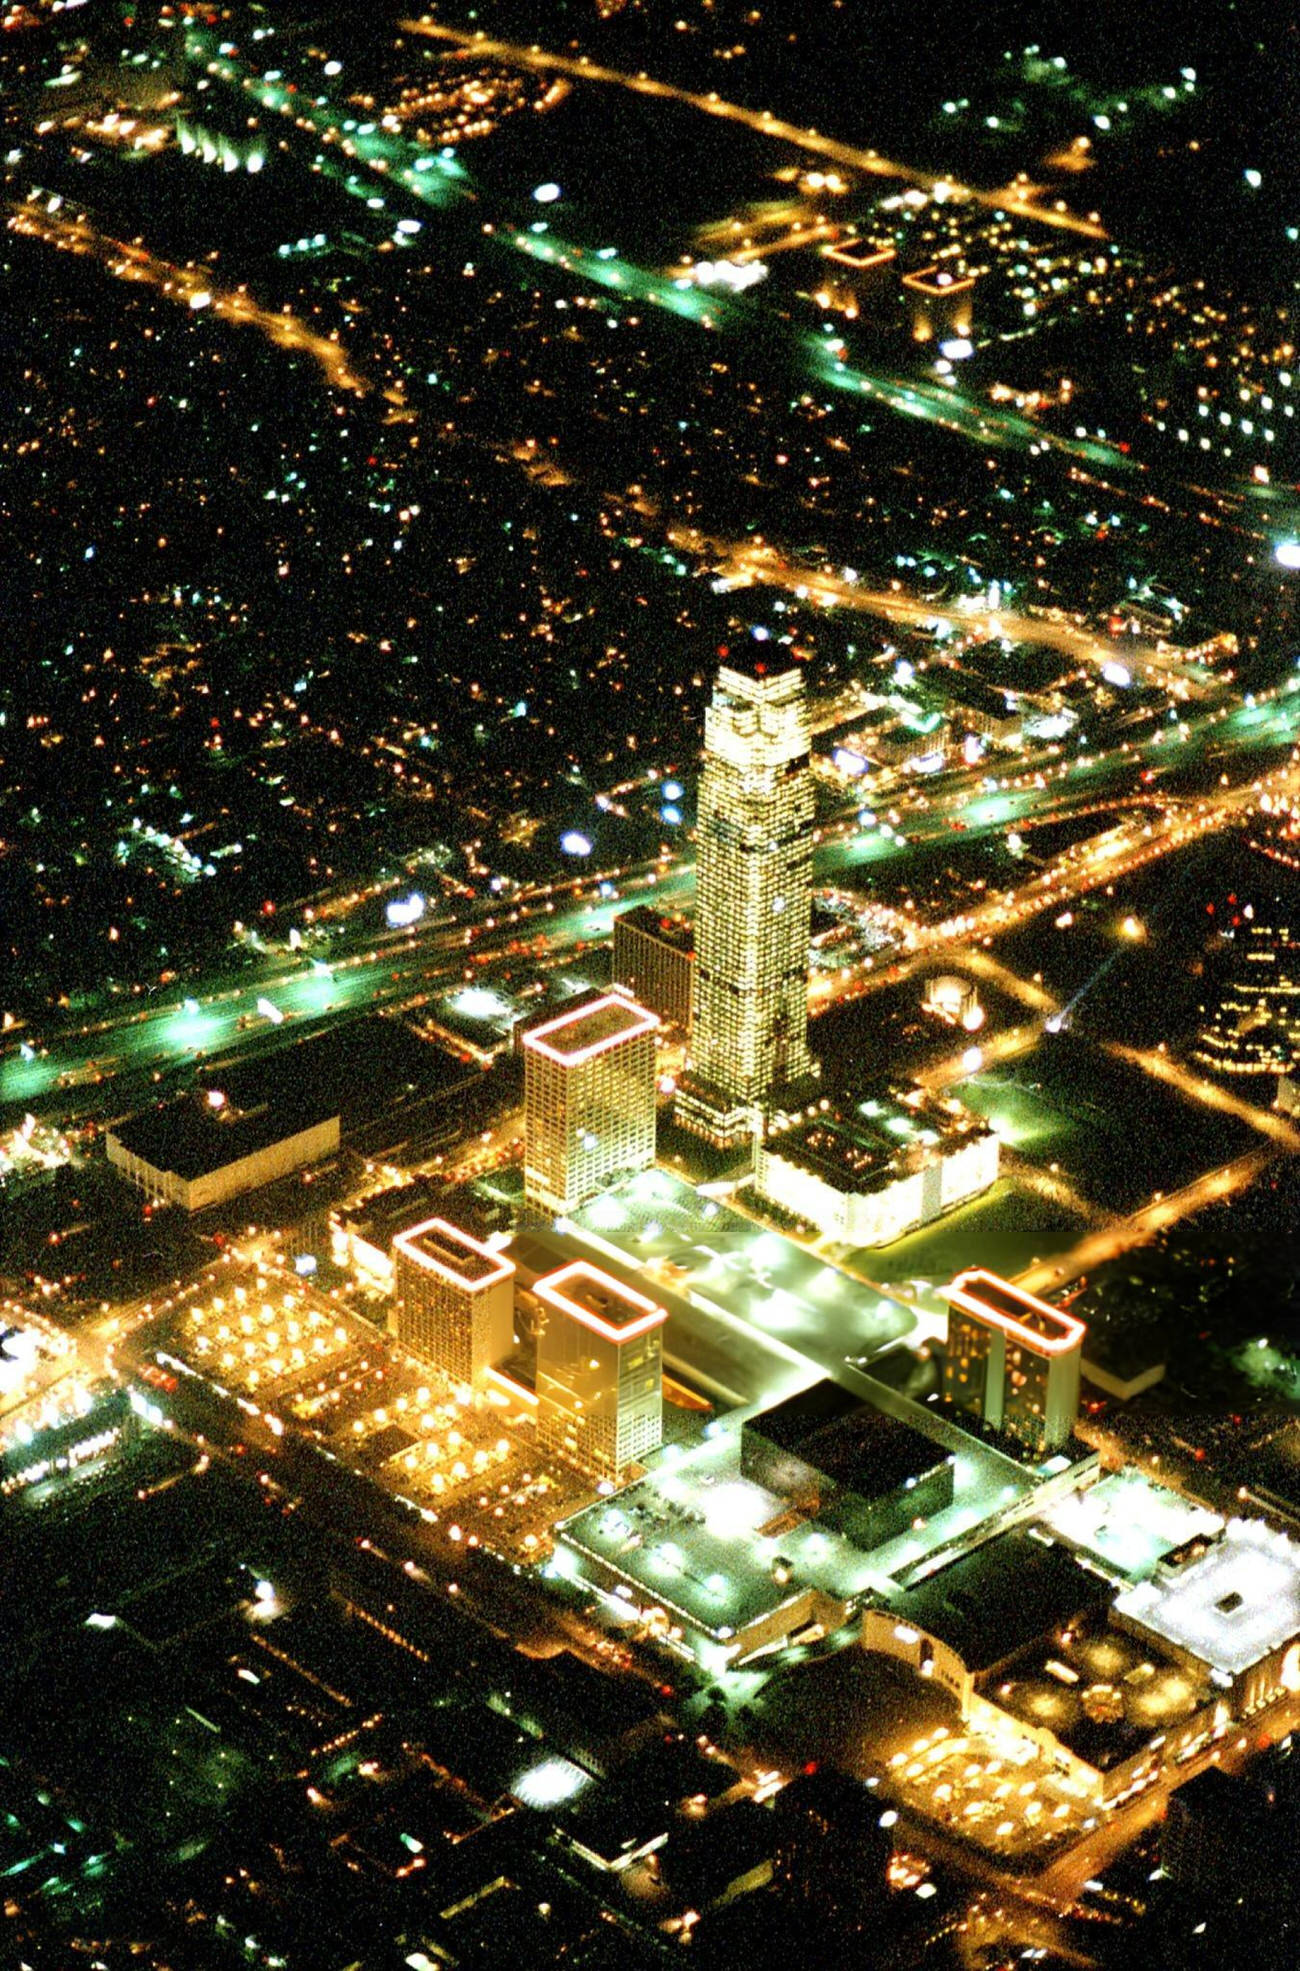 Aerial photo of Uptown before New Year's Eve fireworks, Houston, Texas, December 31, 1986.